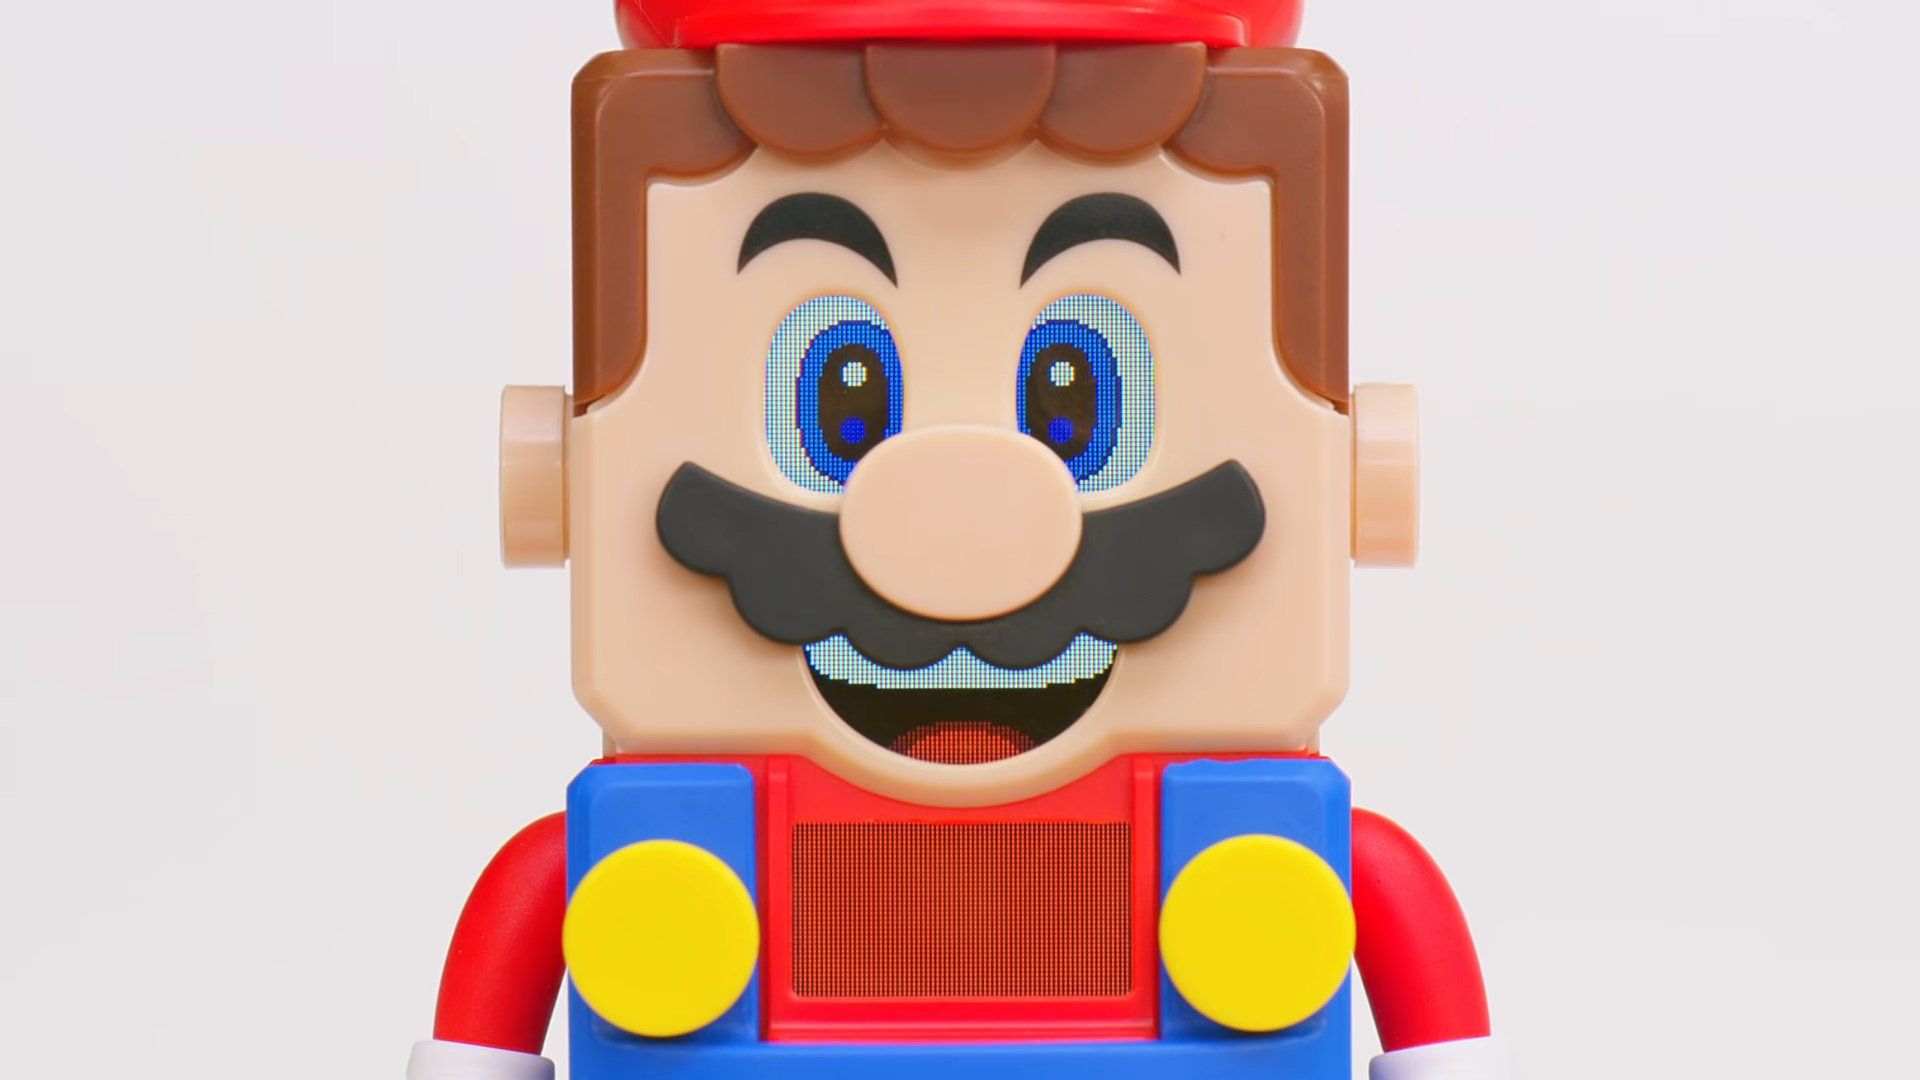 LEGO Assembles Massive Super Mario Build Made Out Of Nearly 000 Bricks